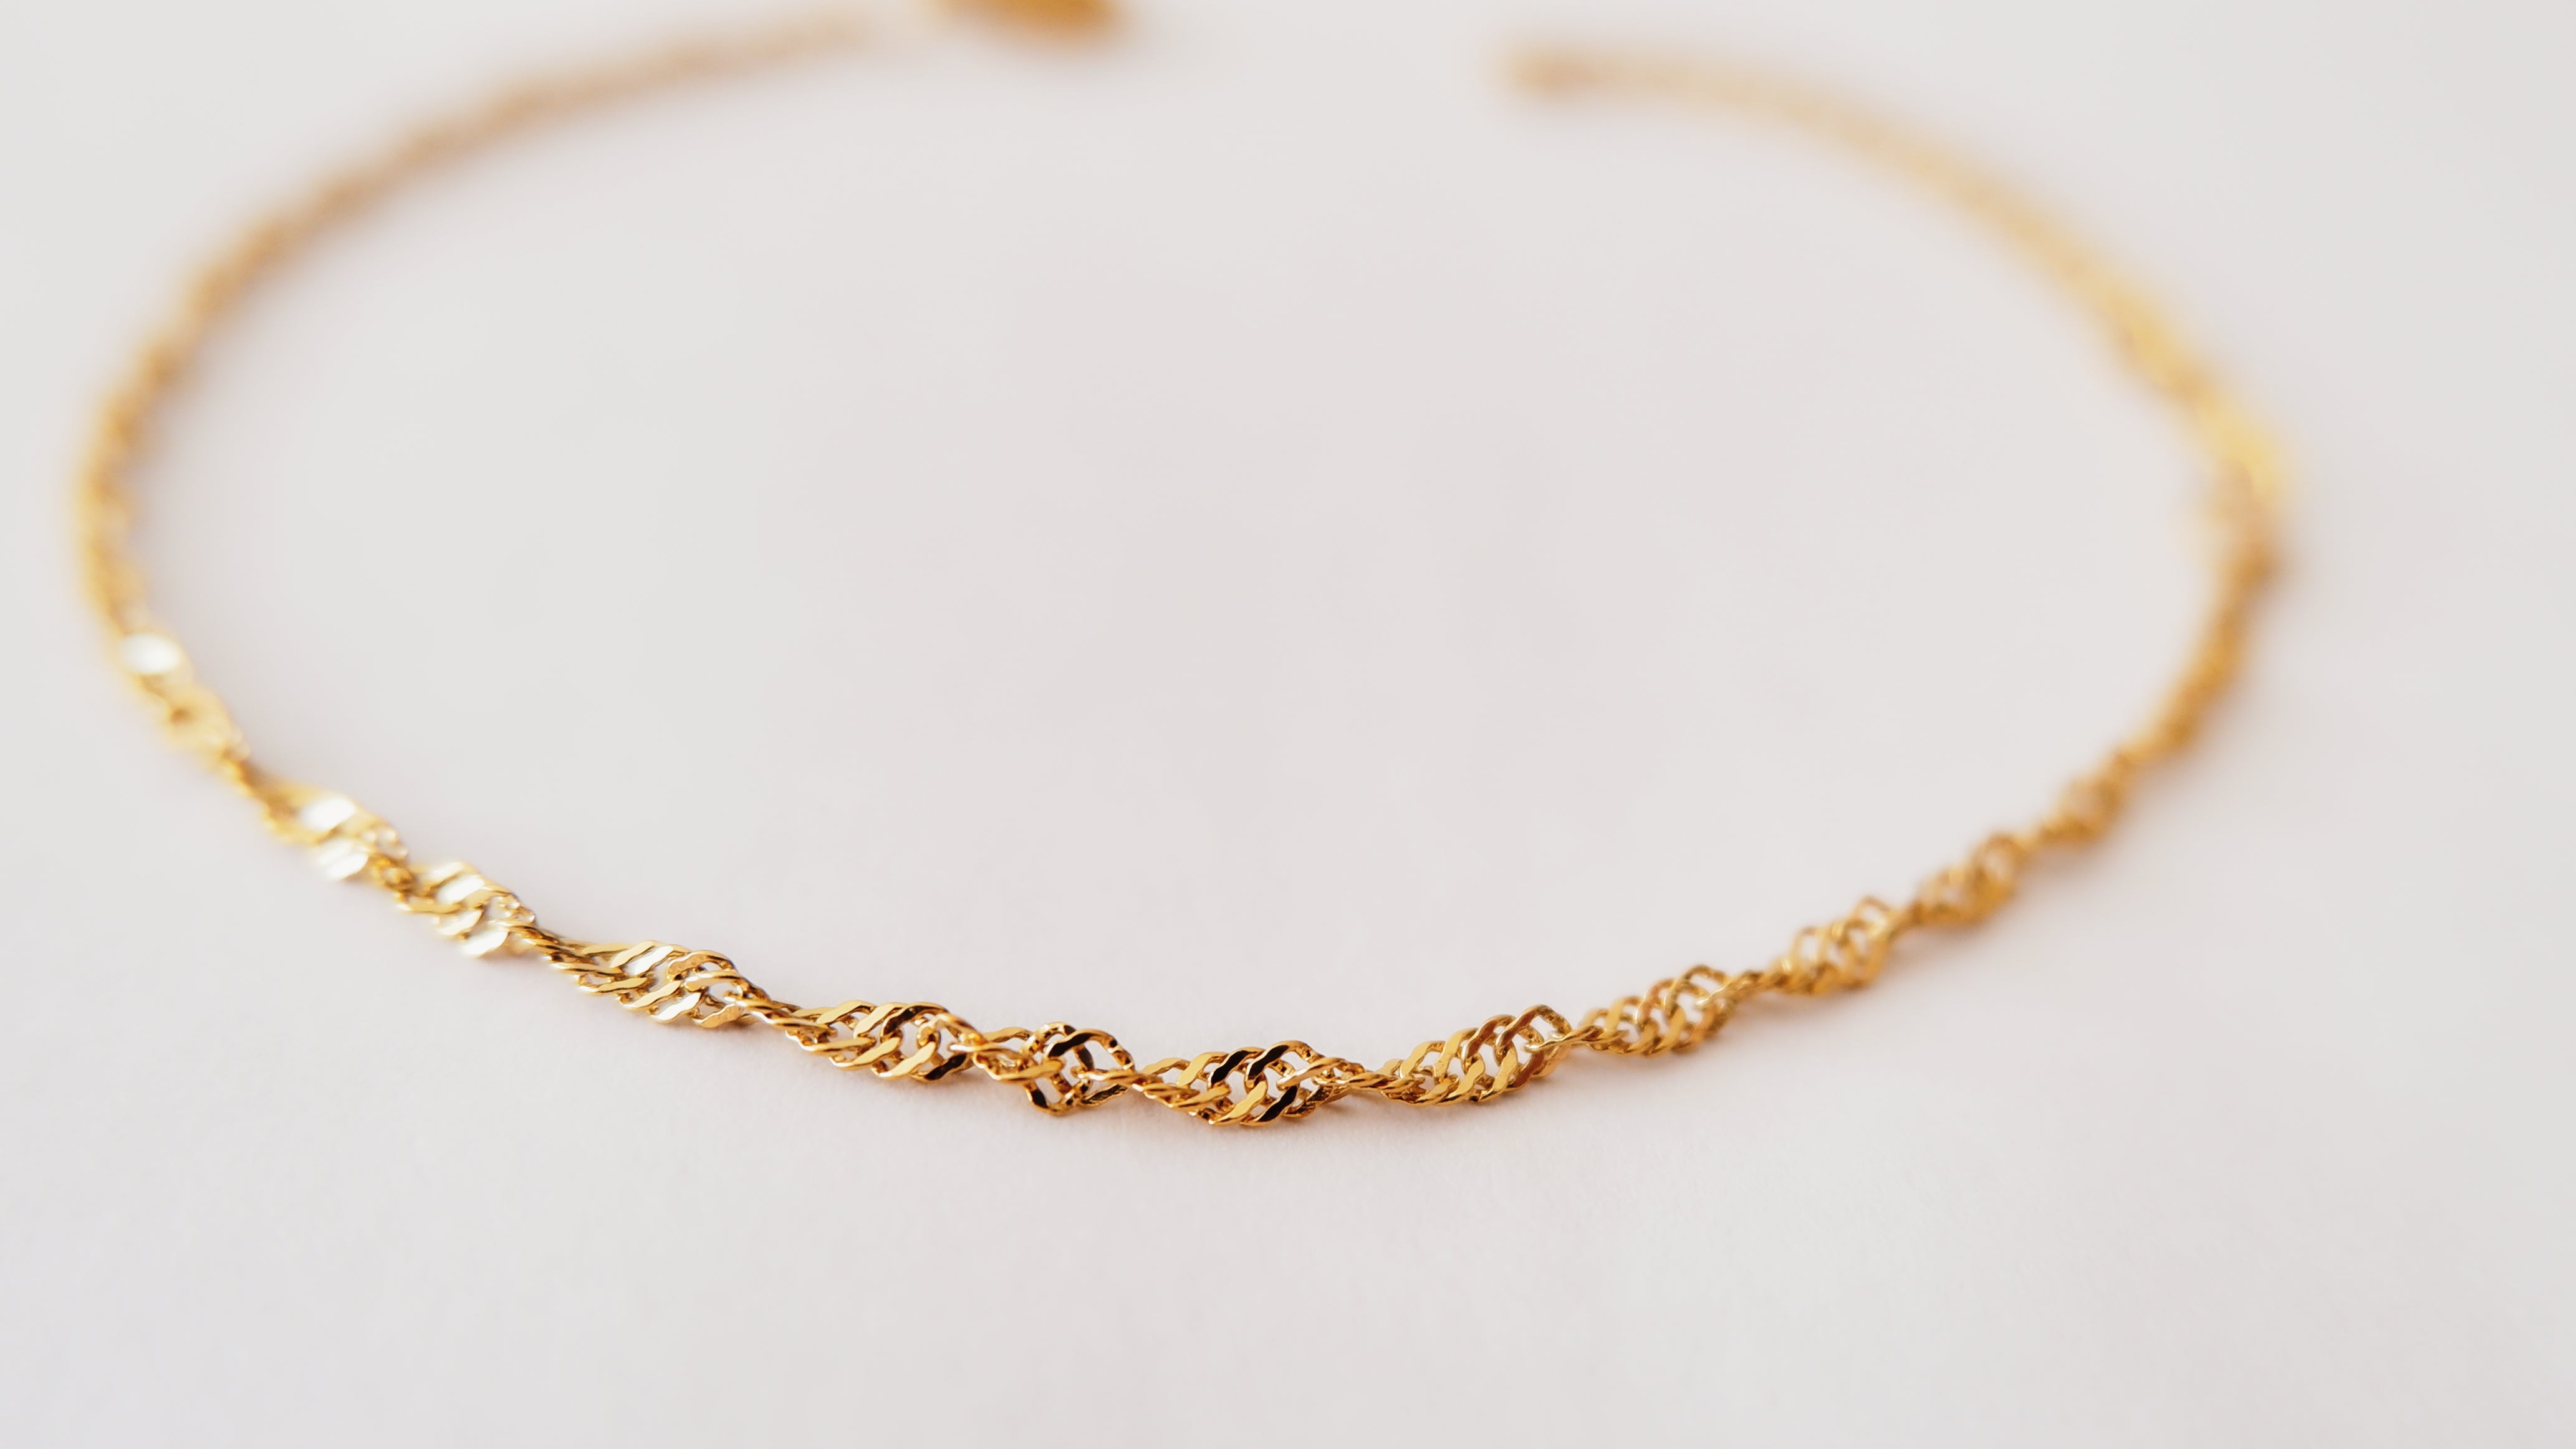 Gleam and durability meet in our gold-plated and stainless steel bracelet, a chic addition to your ensemble from our captivating jewellery collection.